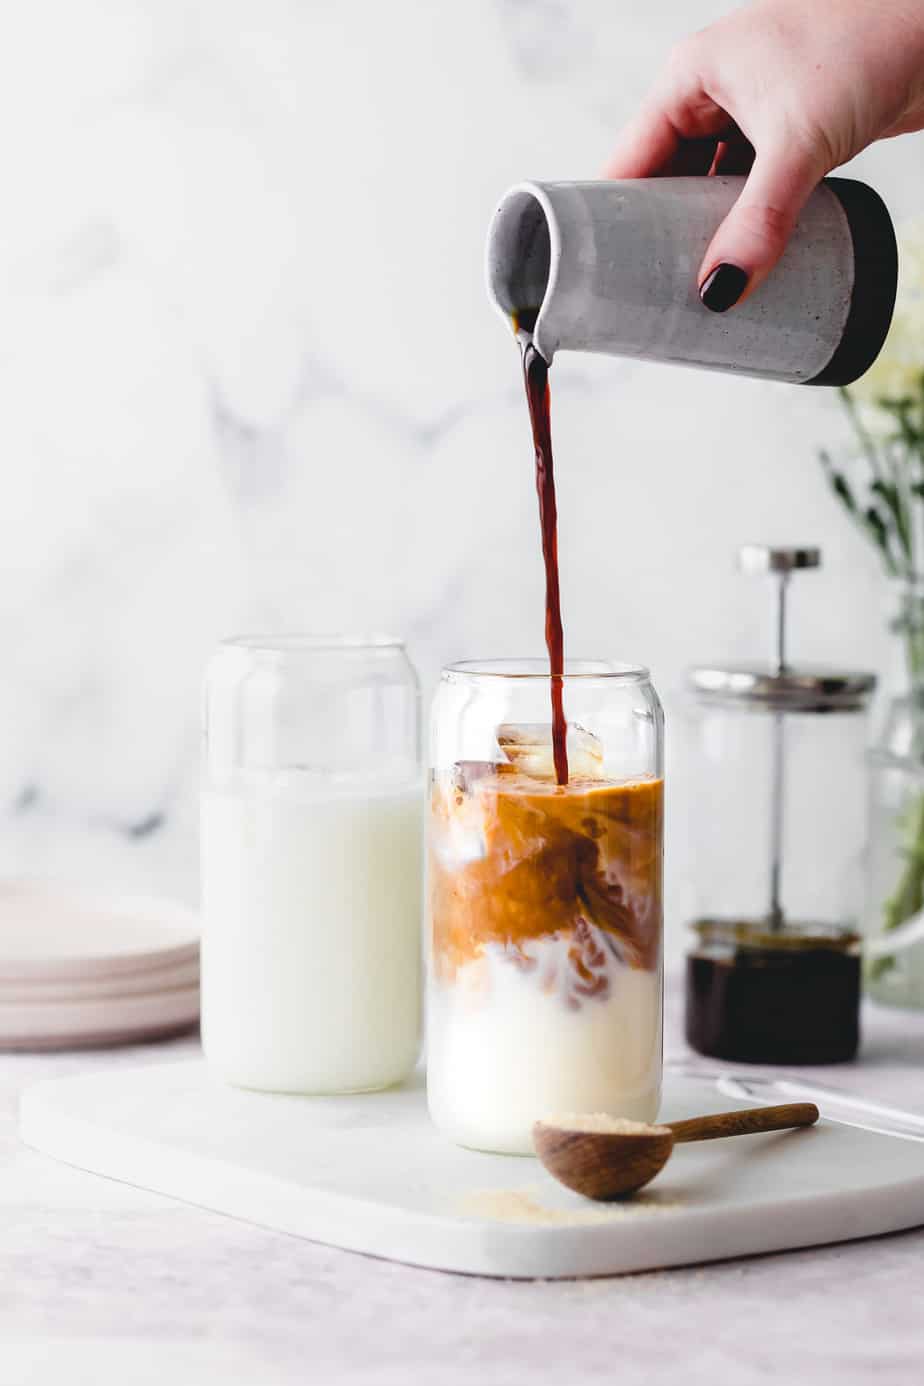 Cold brewed coffee pouring into a glass of milk and ice cubes.